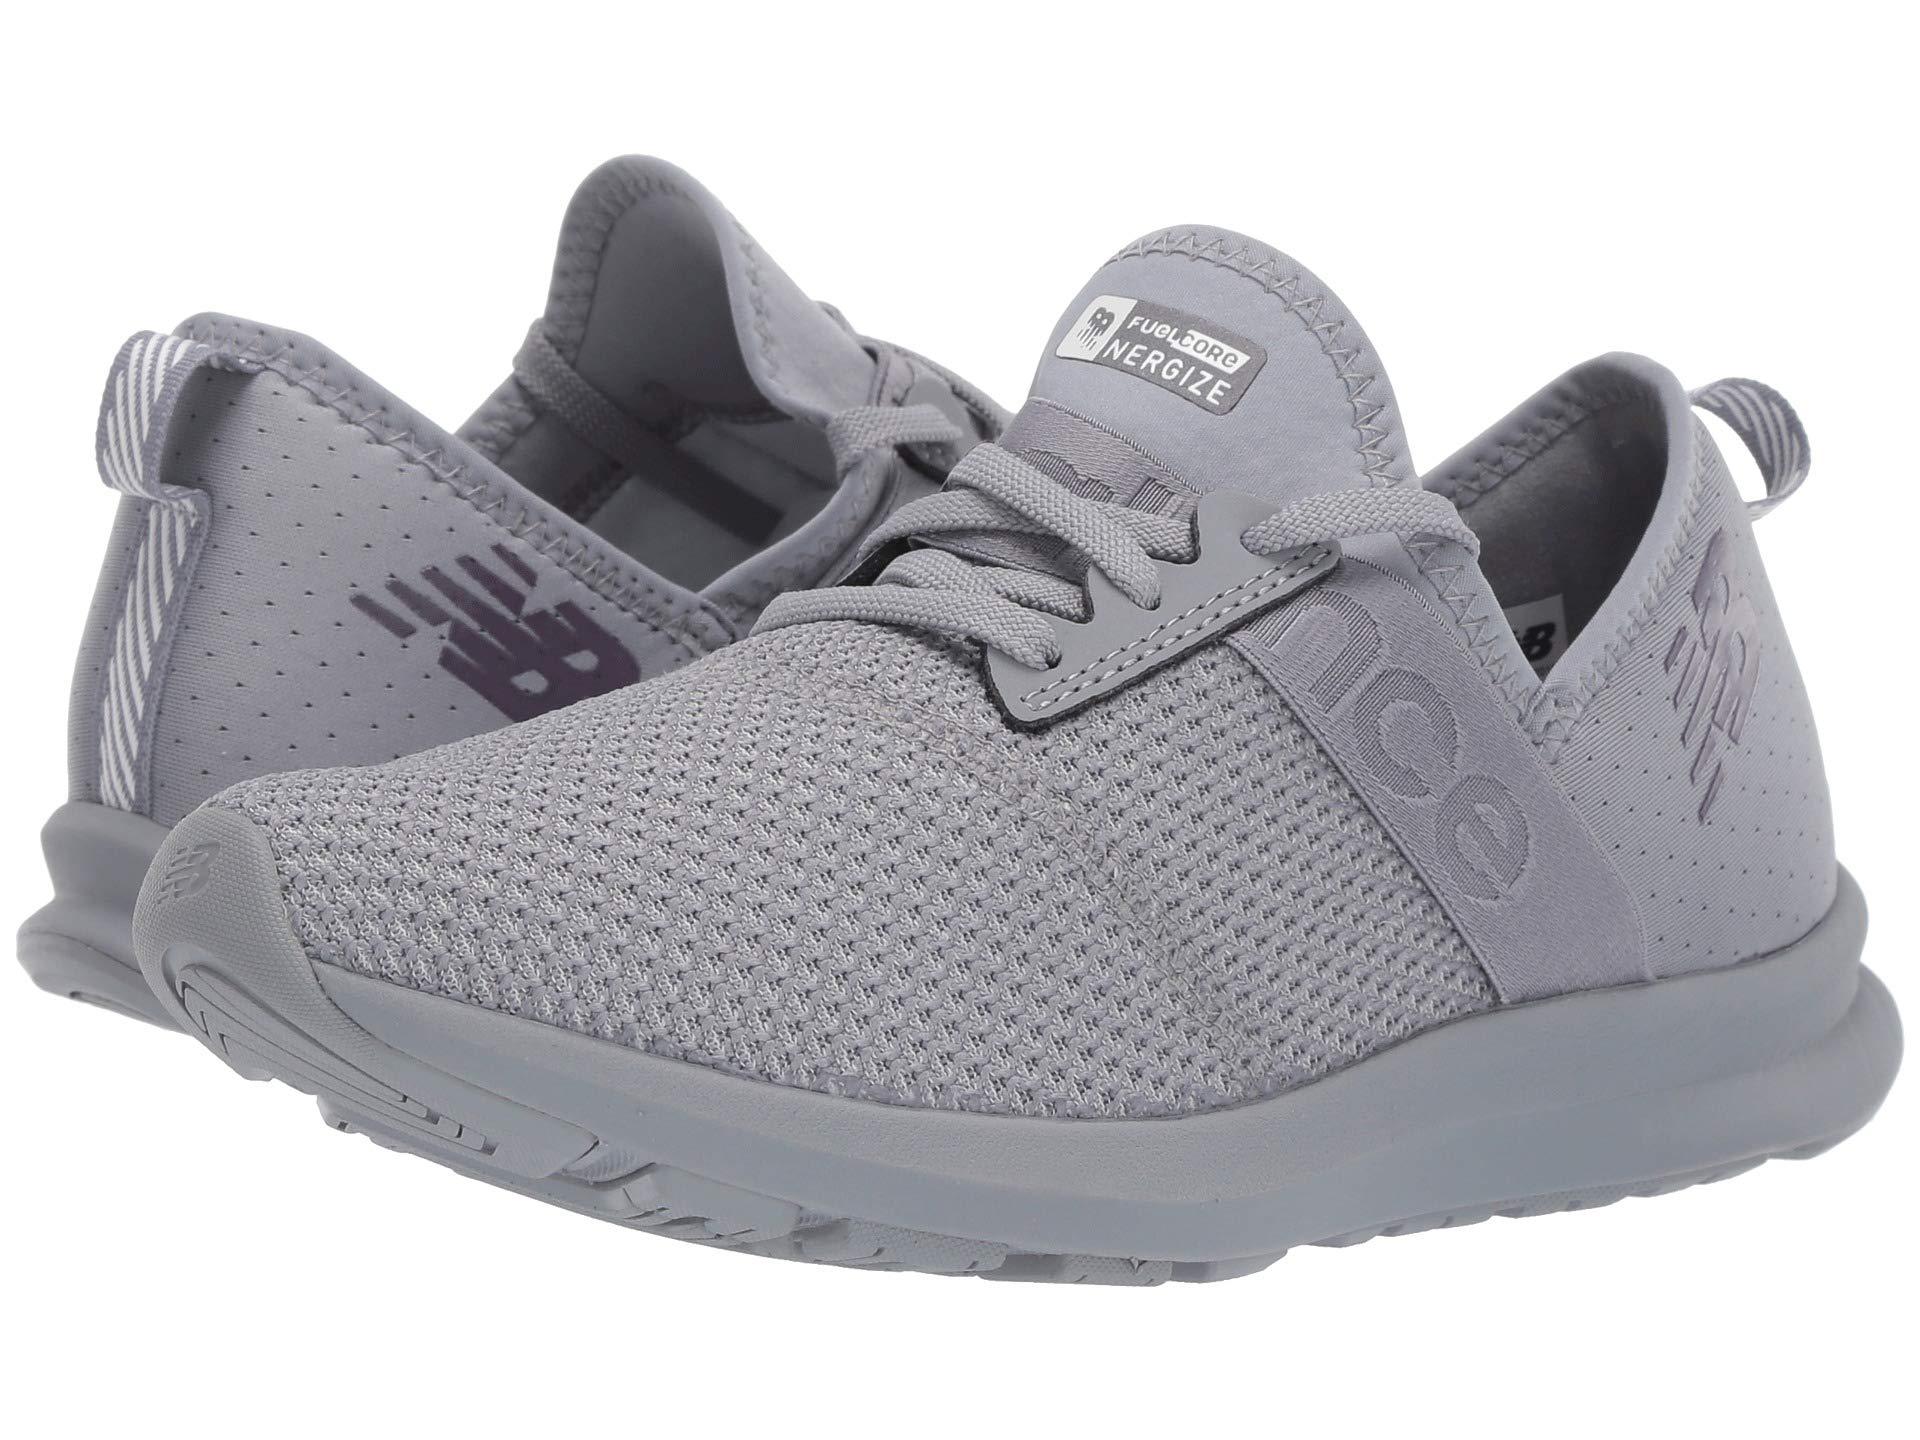 New Balance Nergize Trainer in Gray - Lyst